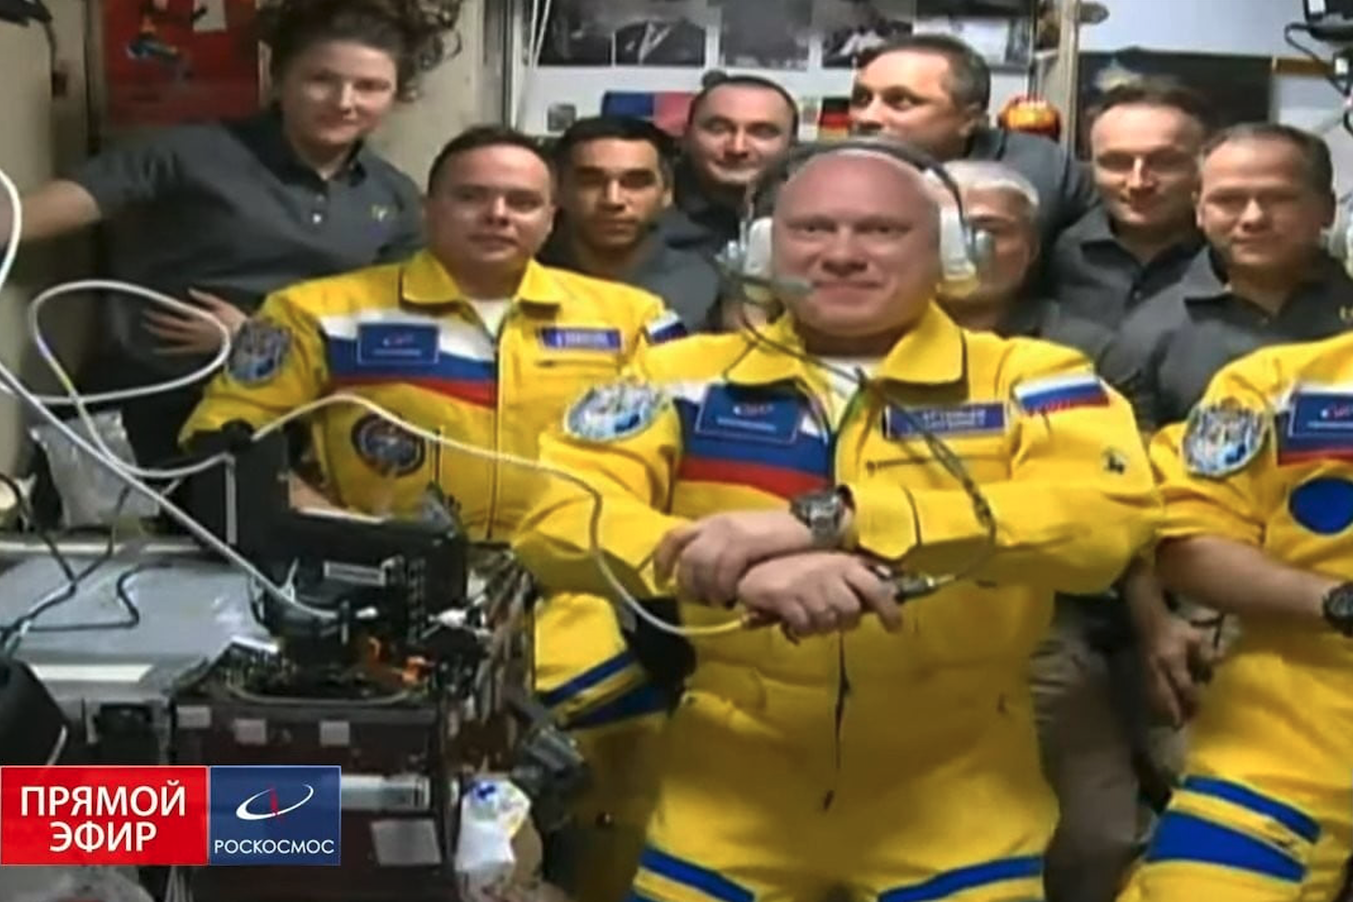 Three Russian cosmonauts Oleg Artemyev, Denis Matveev and Sergey Korsakov have arrived at the International Space Station on Friday March 18, 2022 docking their Soyuz capsule and being seen wearing flight suits in yellow and blue colors that match the Ukrainian flag. 